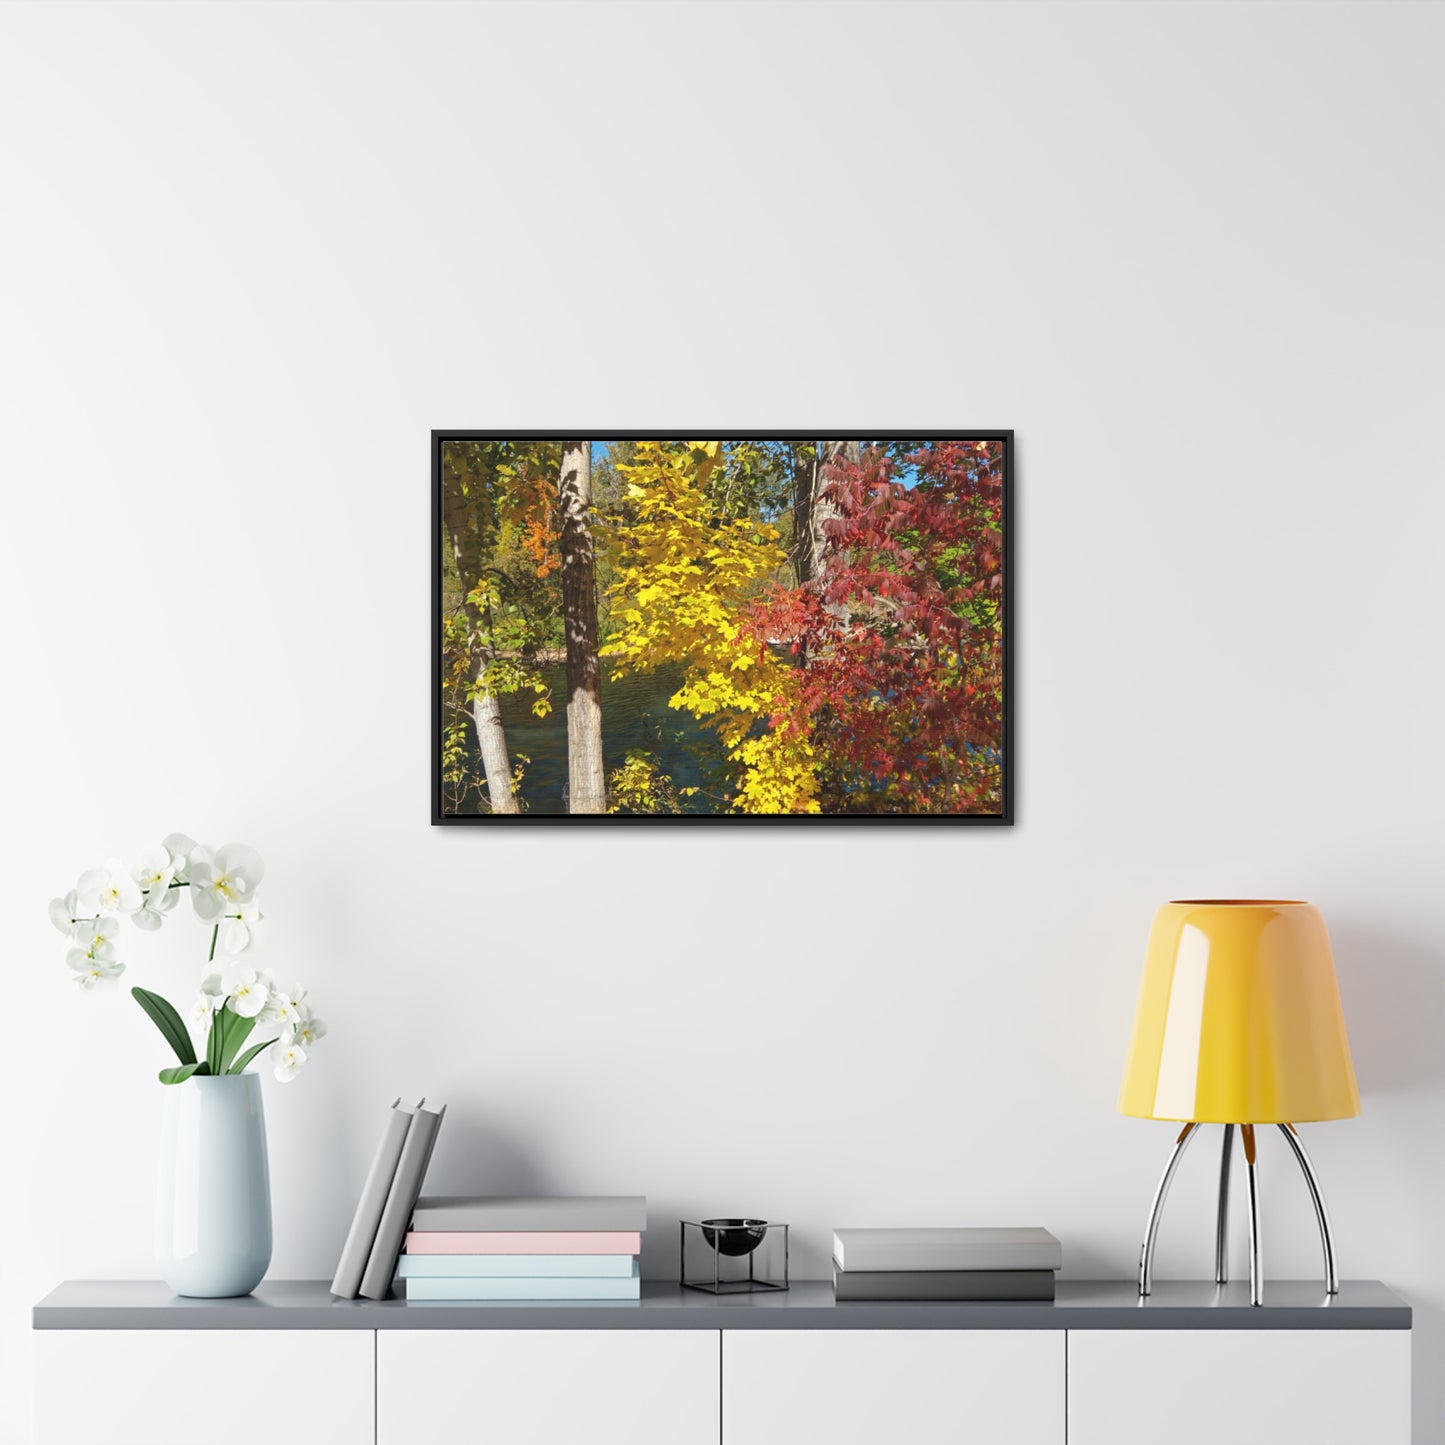 River & Autumn Leaves Gallery Canvas Wraps Framed